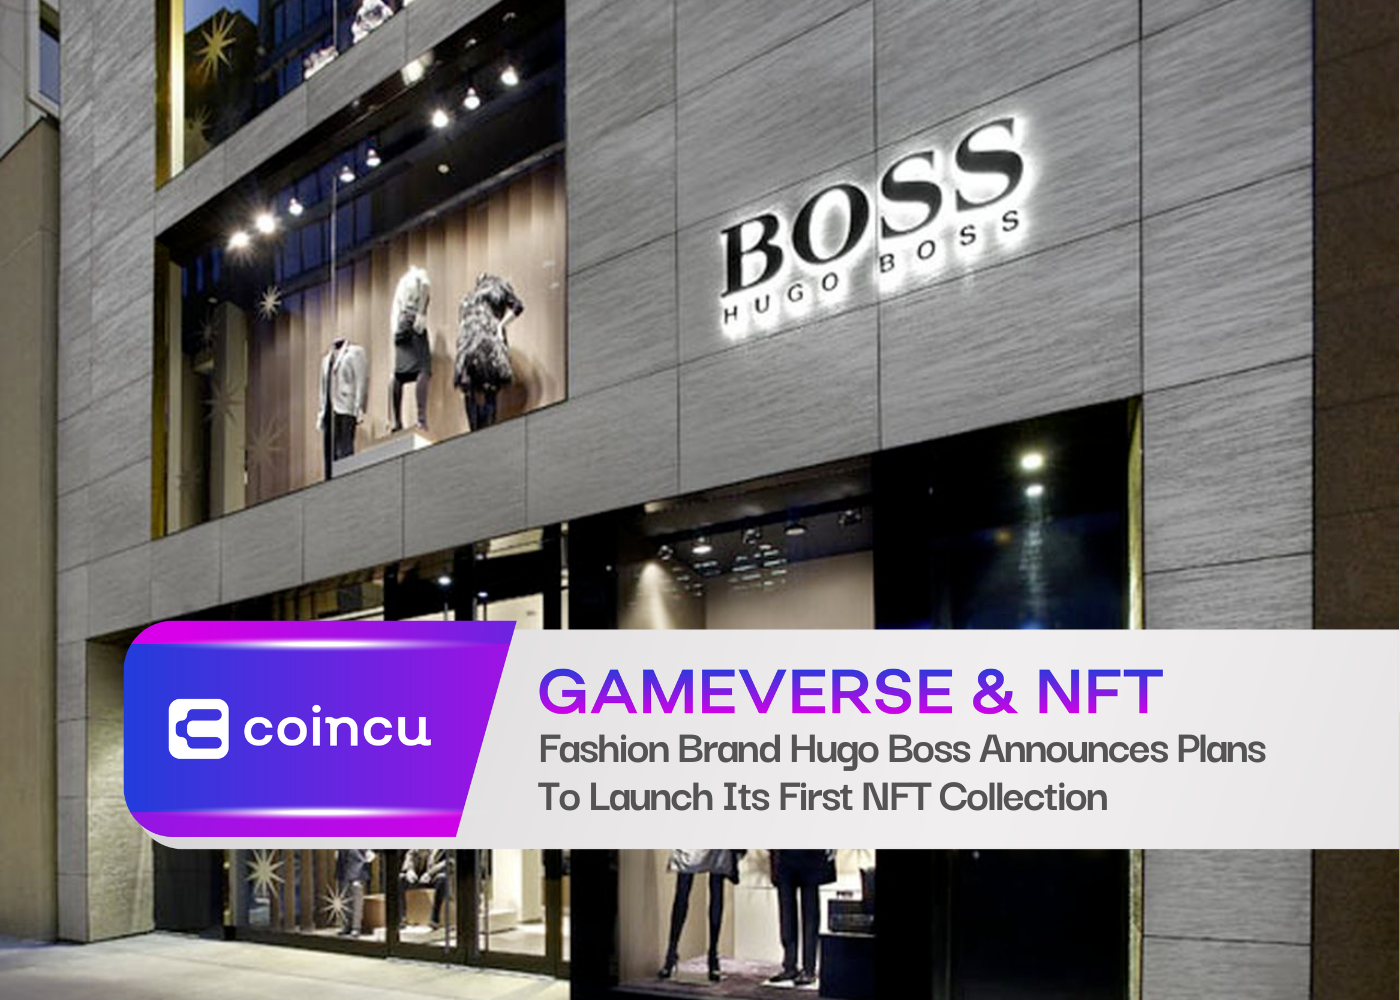 Fashion Brand Hugo Boss Announces Plans To Launch Its First NFT Collection